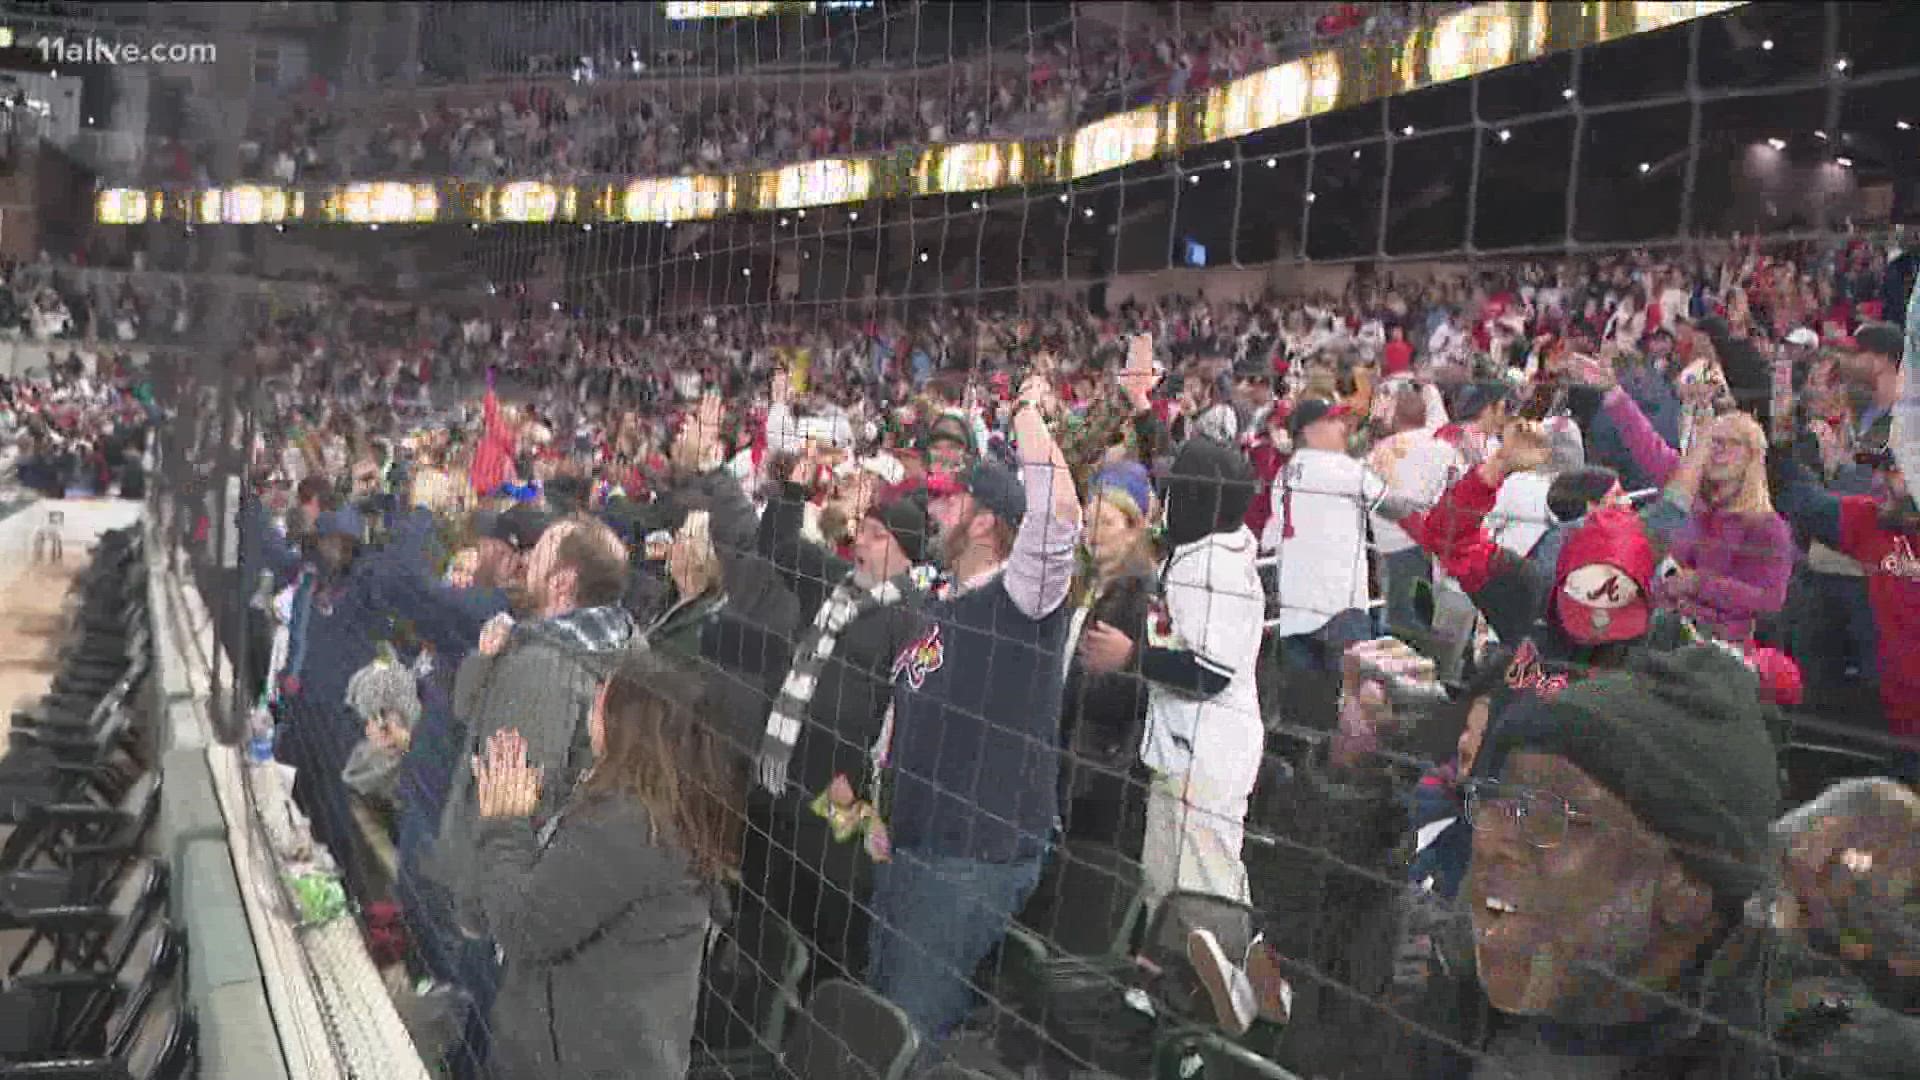 Braves fans react to home run in World Series Game 6